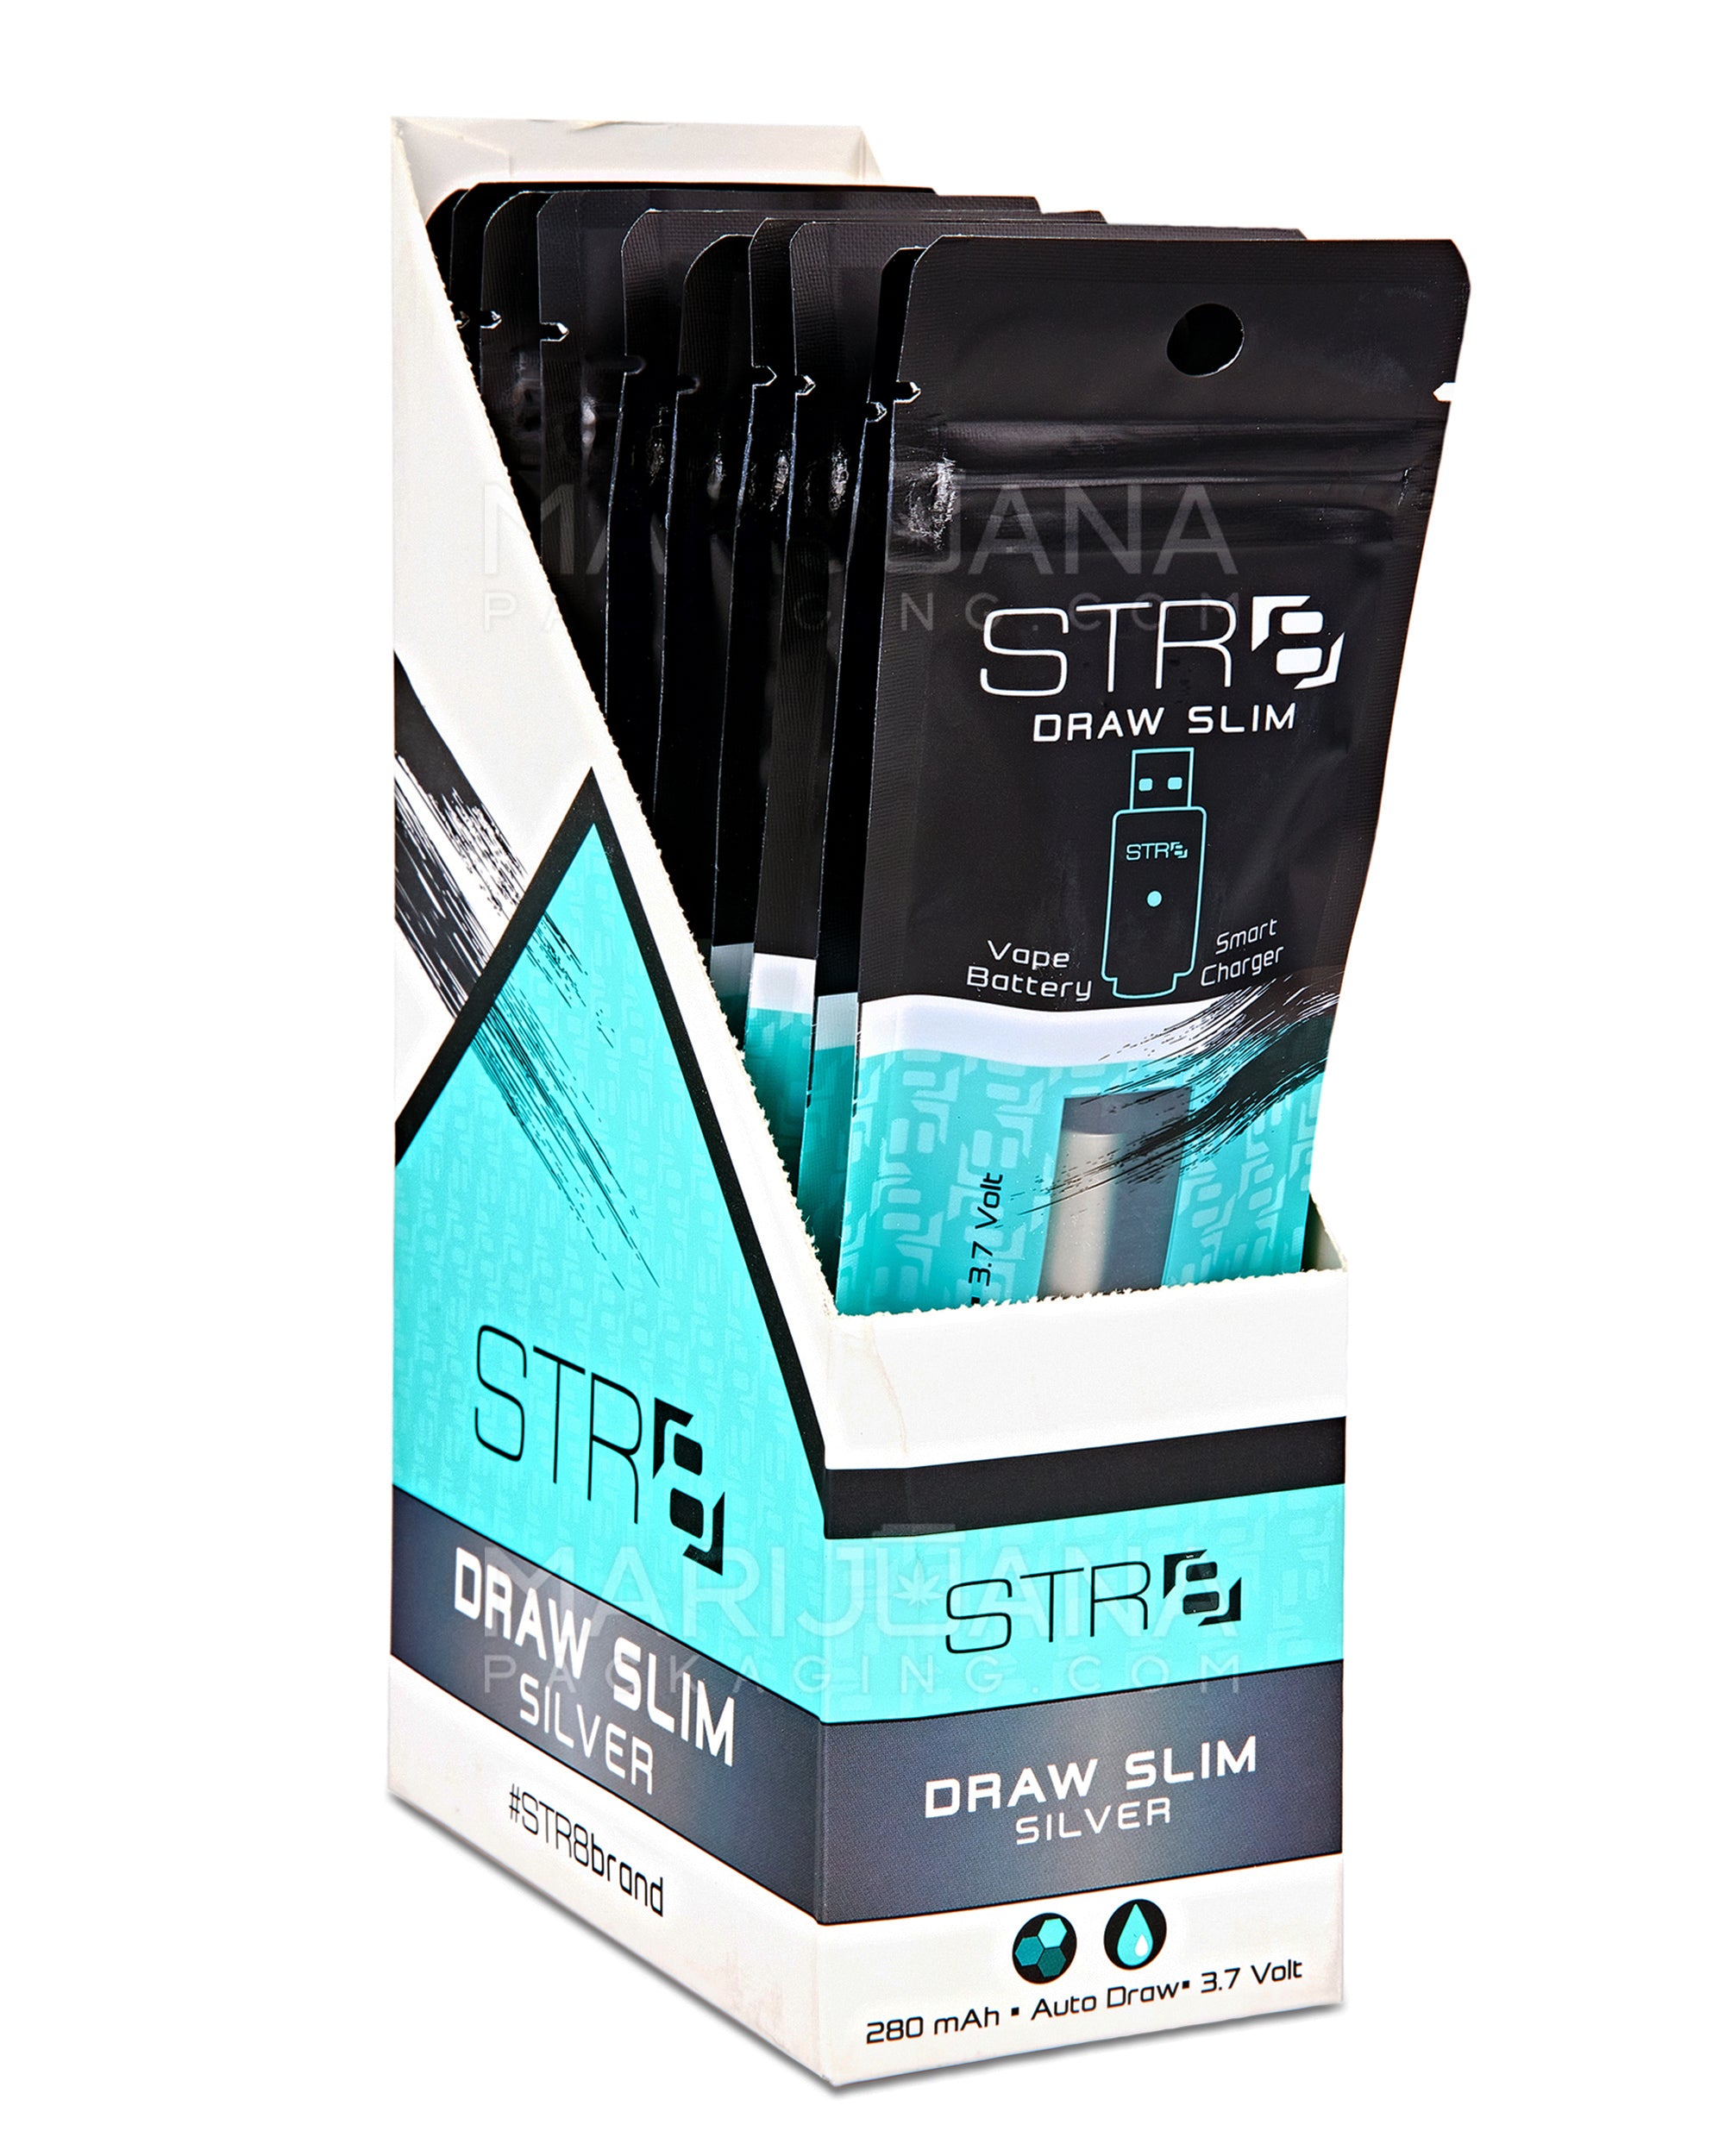 STR8 | Auto Draw Slim Vape Batteries with Charger | 280 mAh - Silver- 10 Count - 1